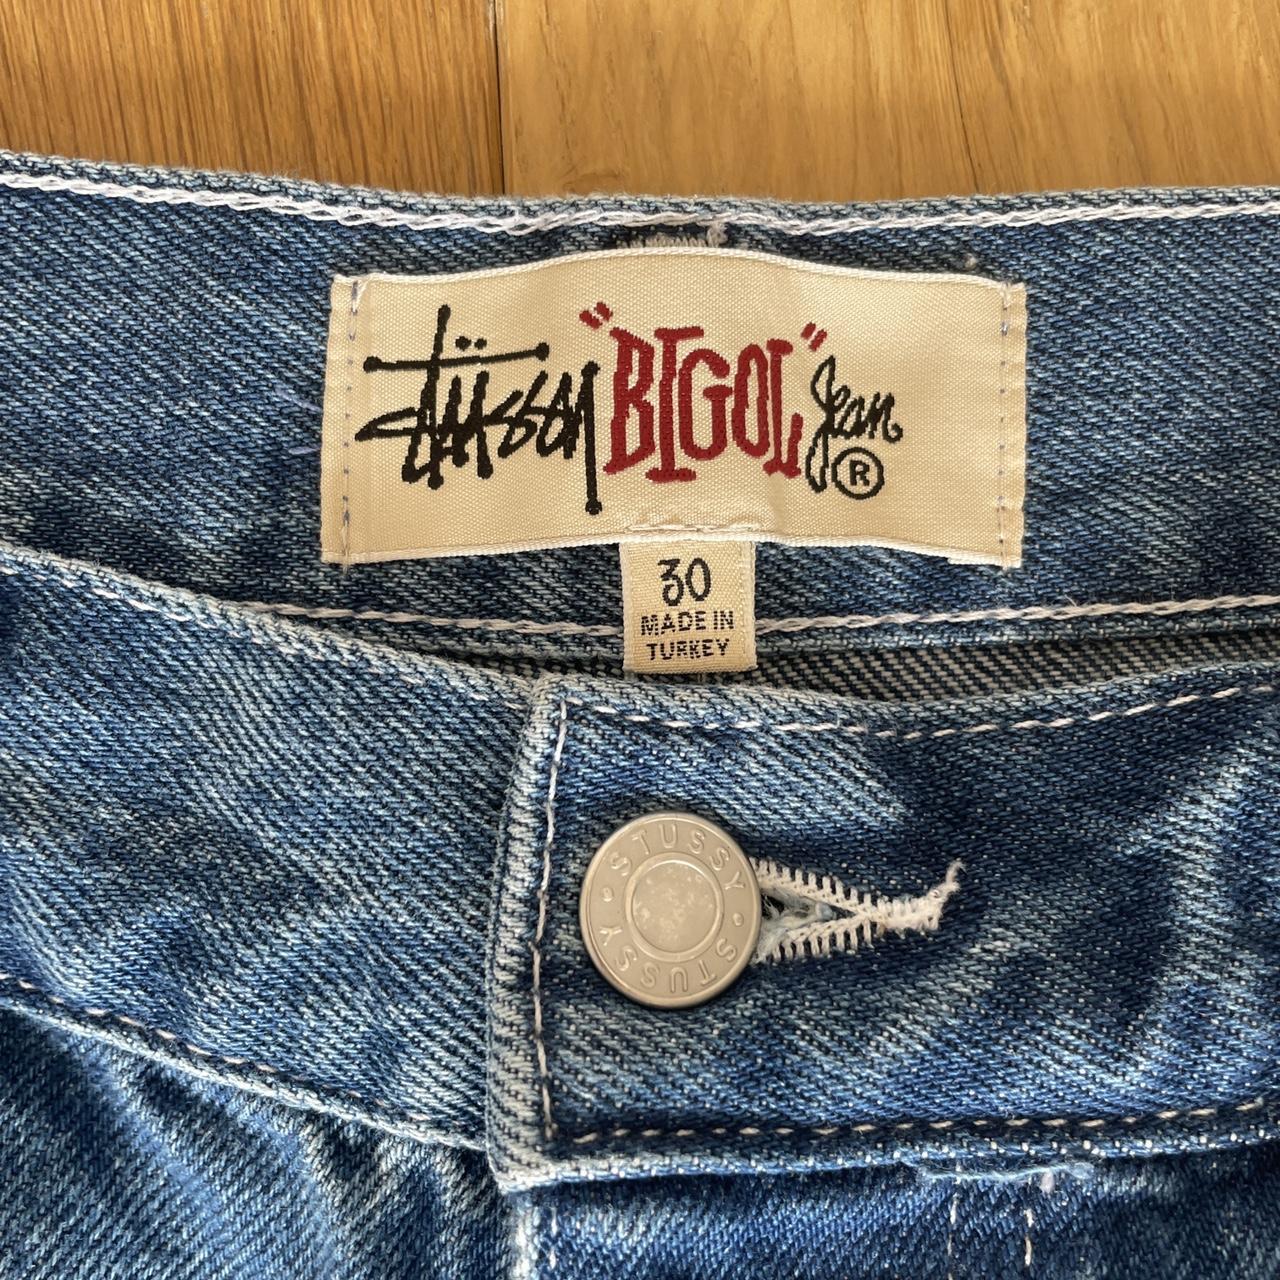 Stussy Big Ol Jean Shorts 30 👀 These are super rare... - Depop